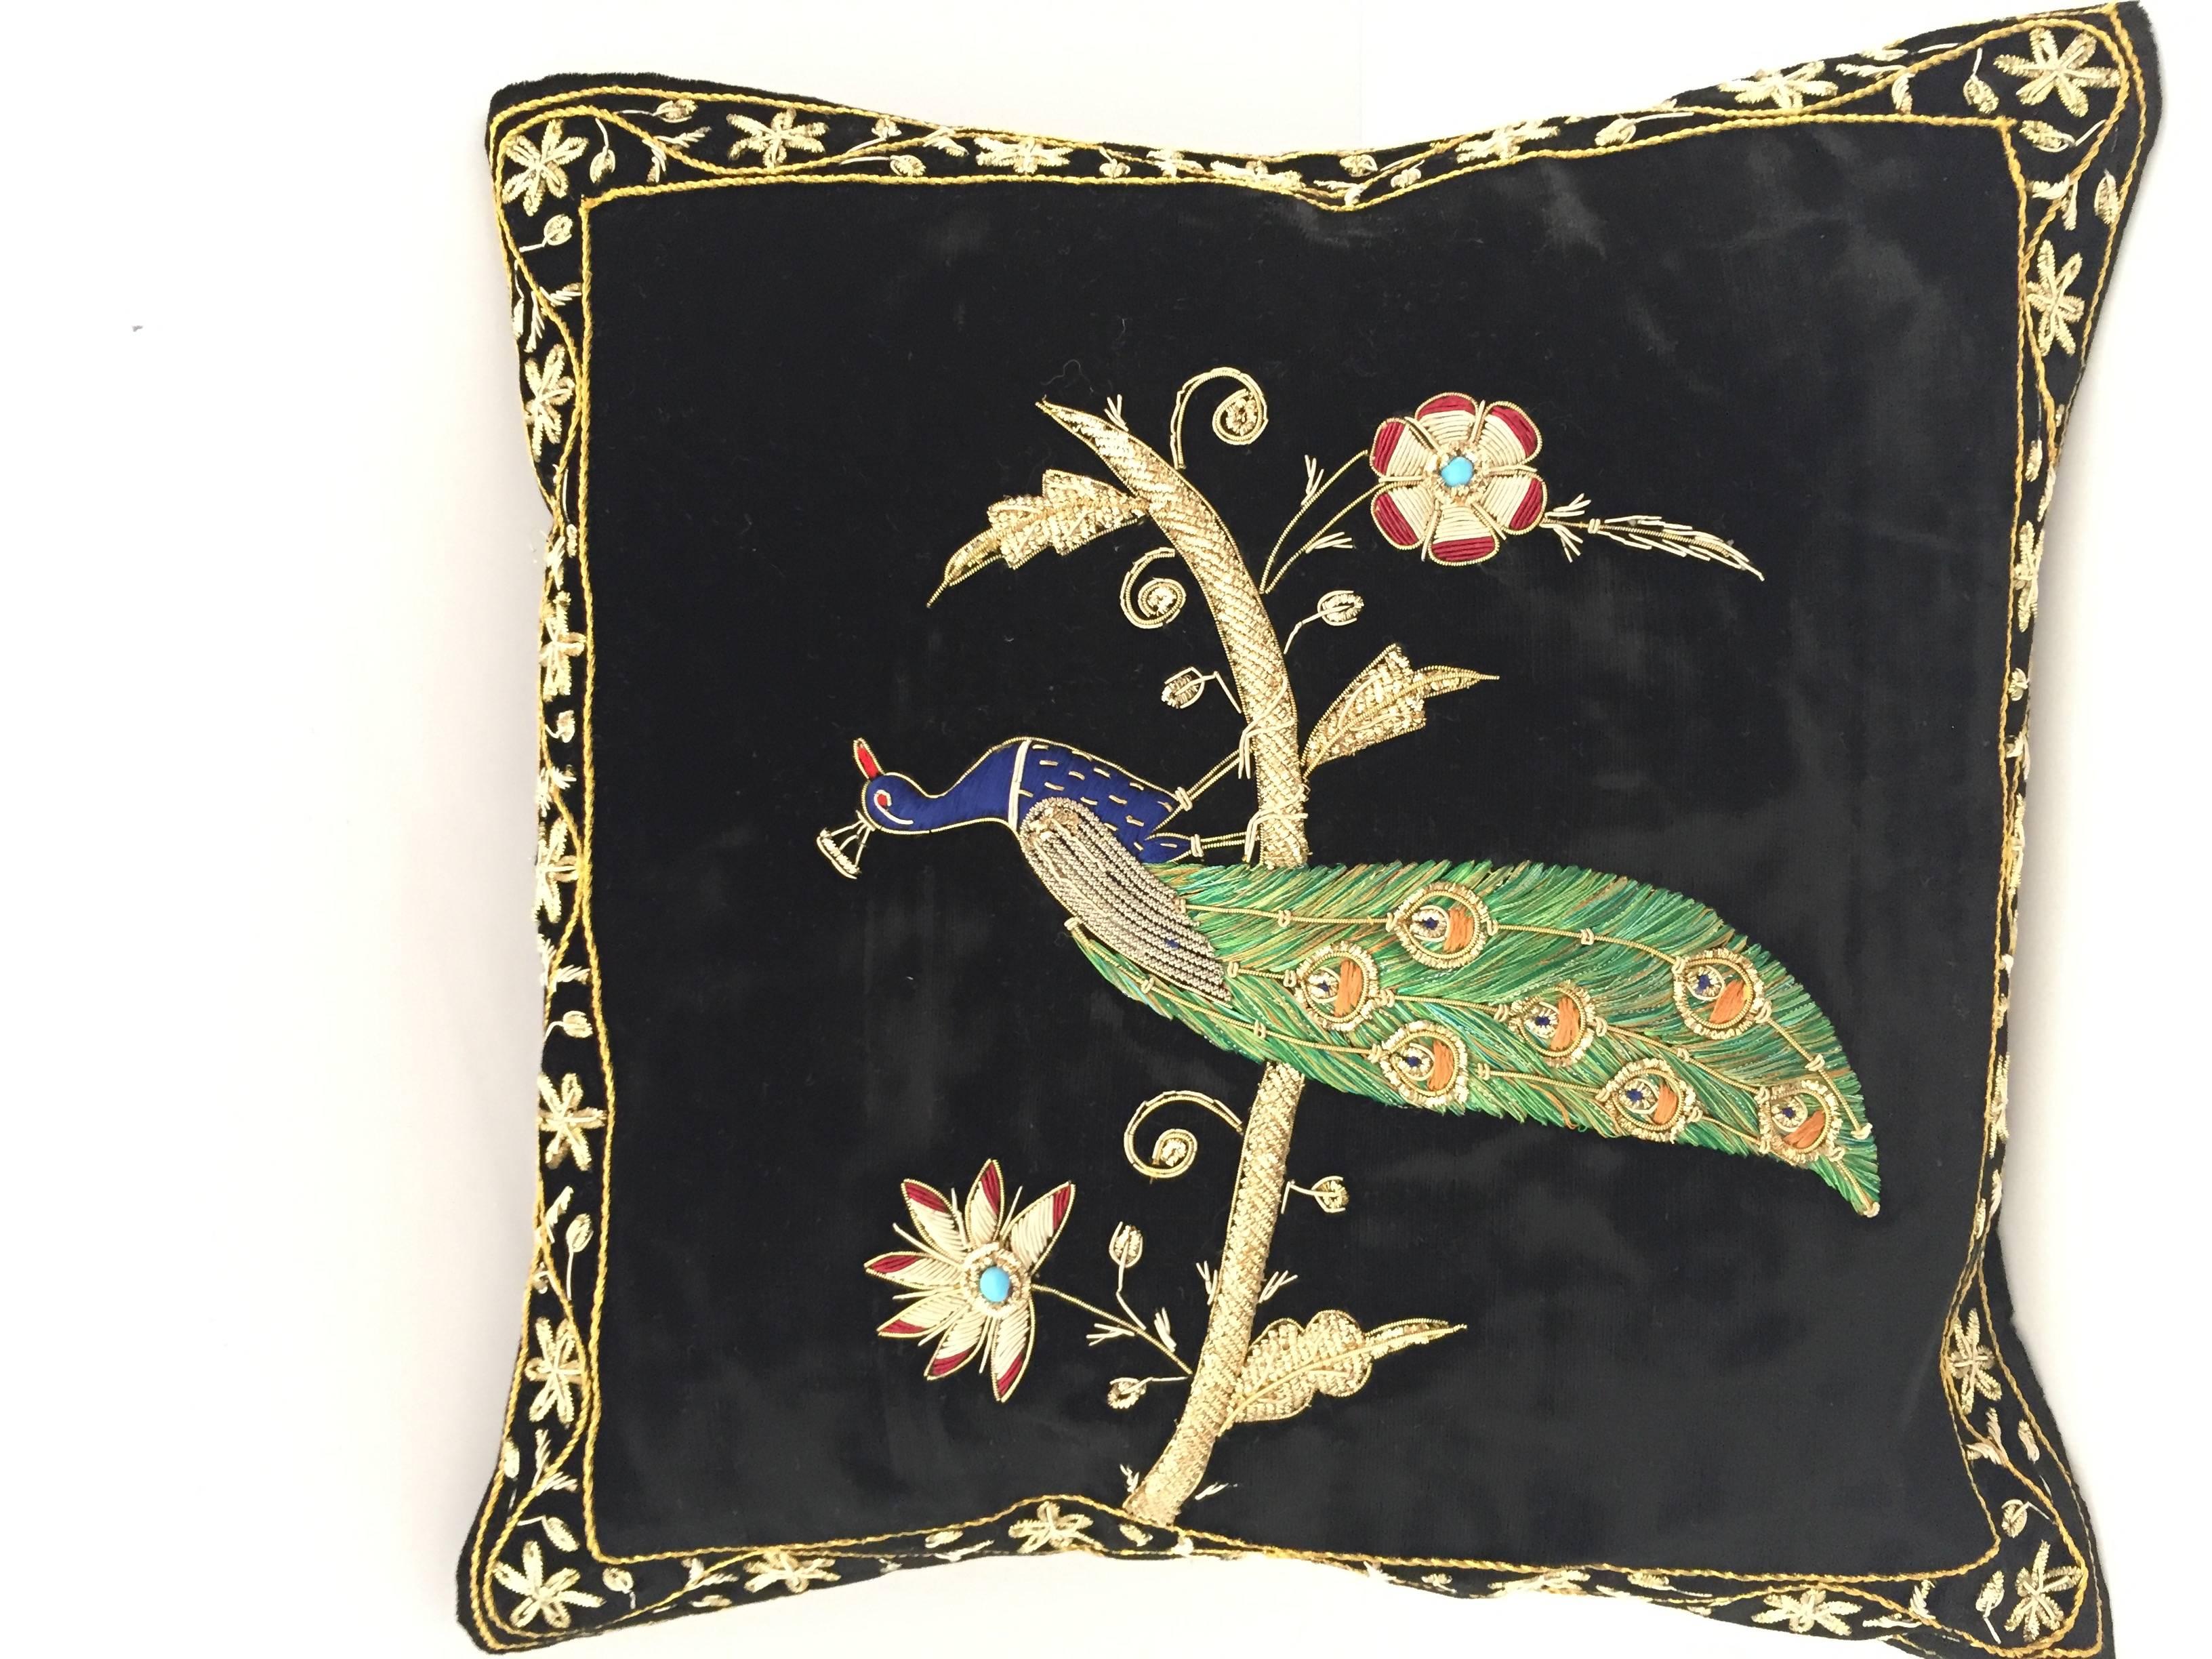 Velvet Black Silk Throw Pillow Embroidered with Gold Peacock Design 1